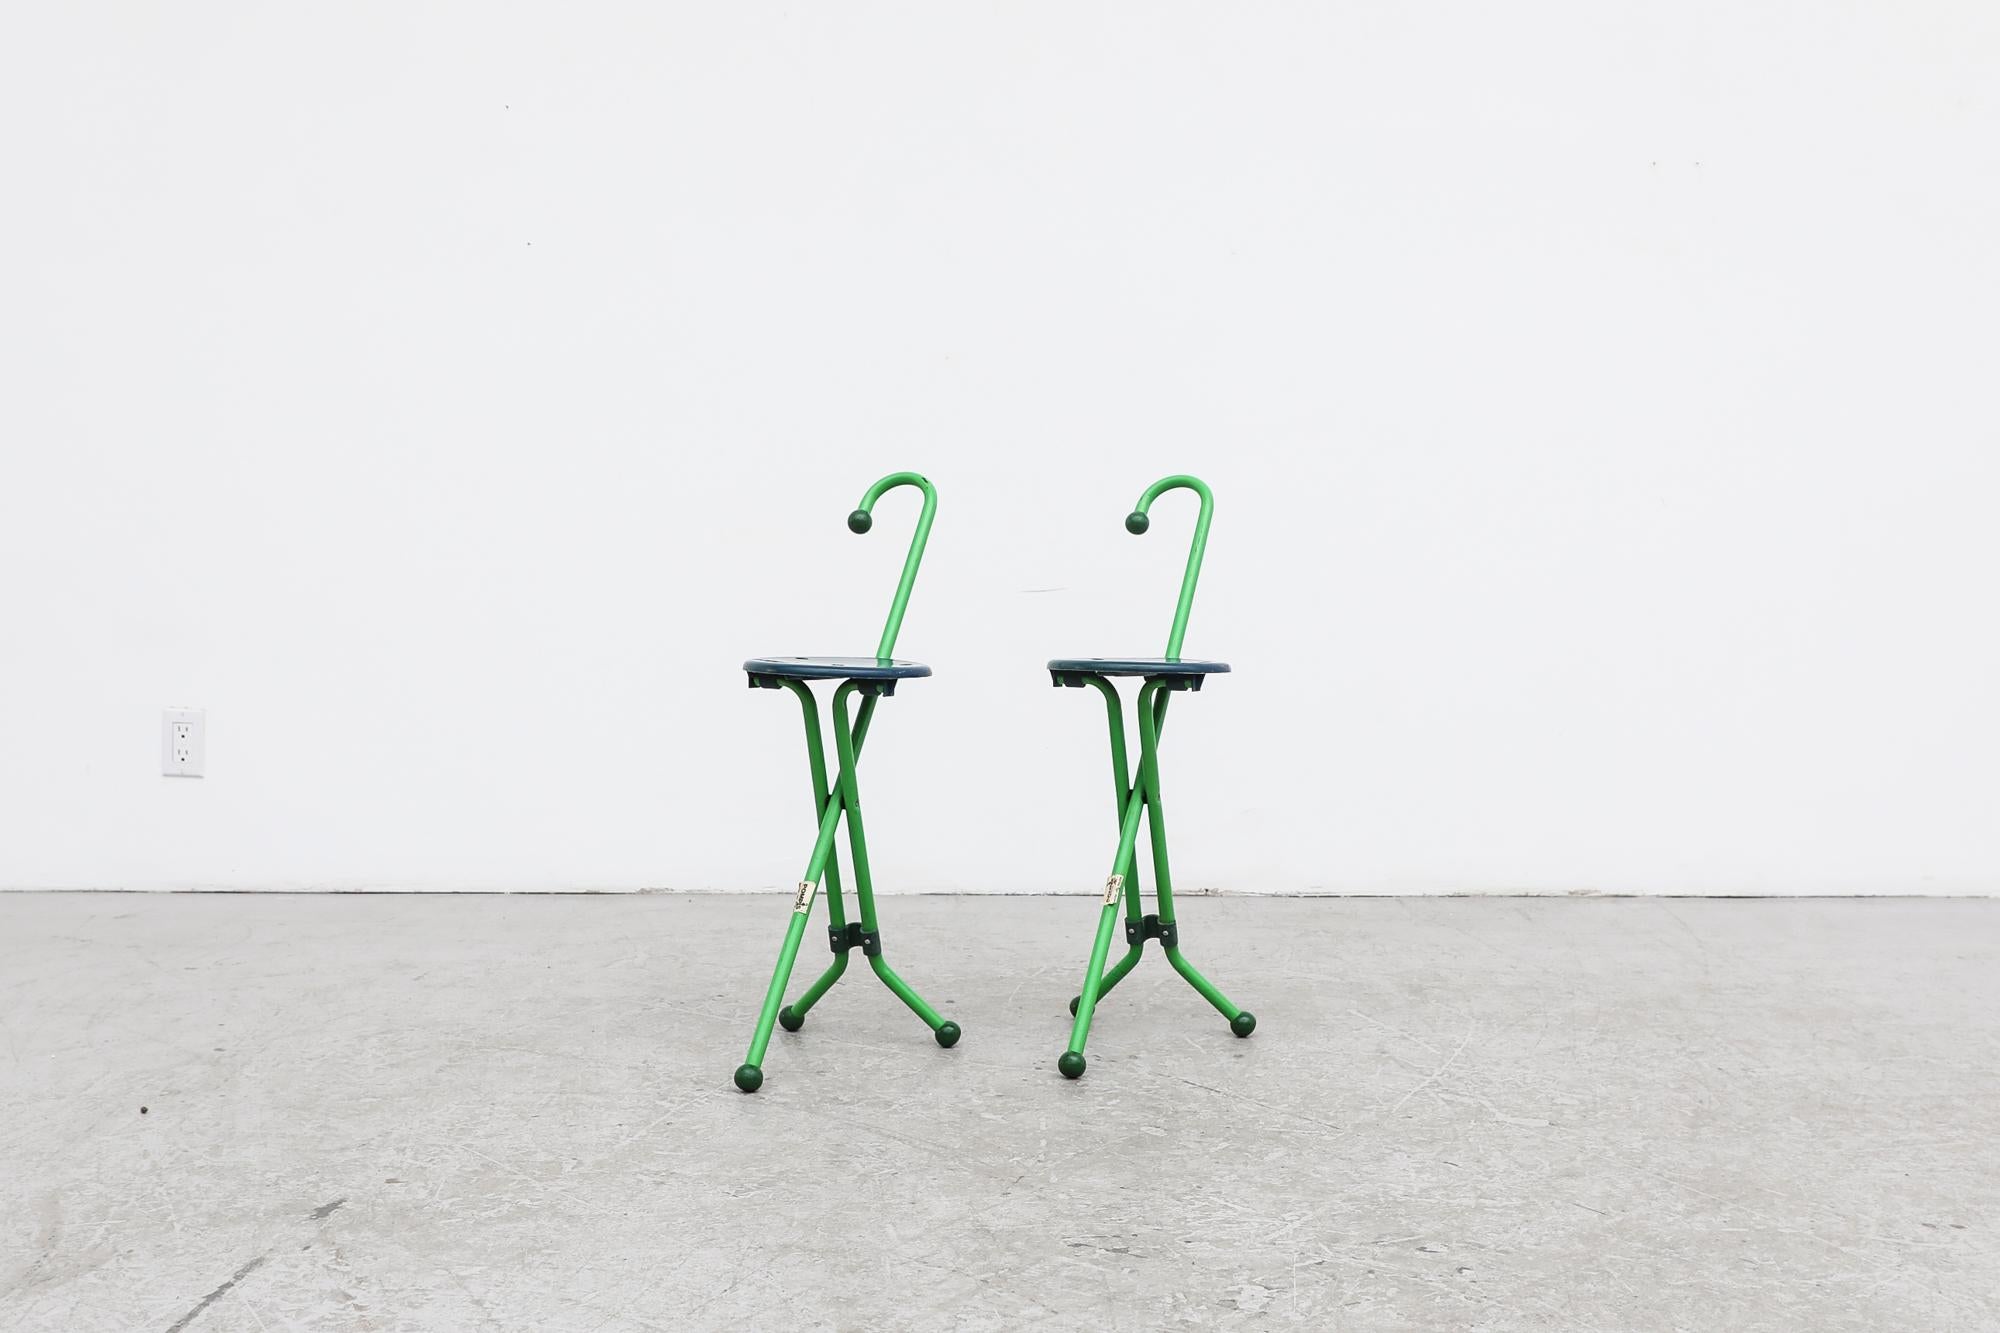 Vintage green folding cane chairs by Pompis in the style of the 'Ulisse' by Ivan Loss. These are called 